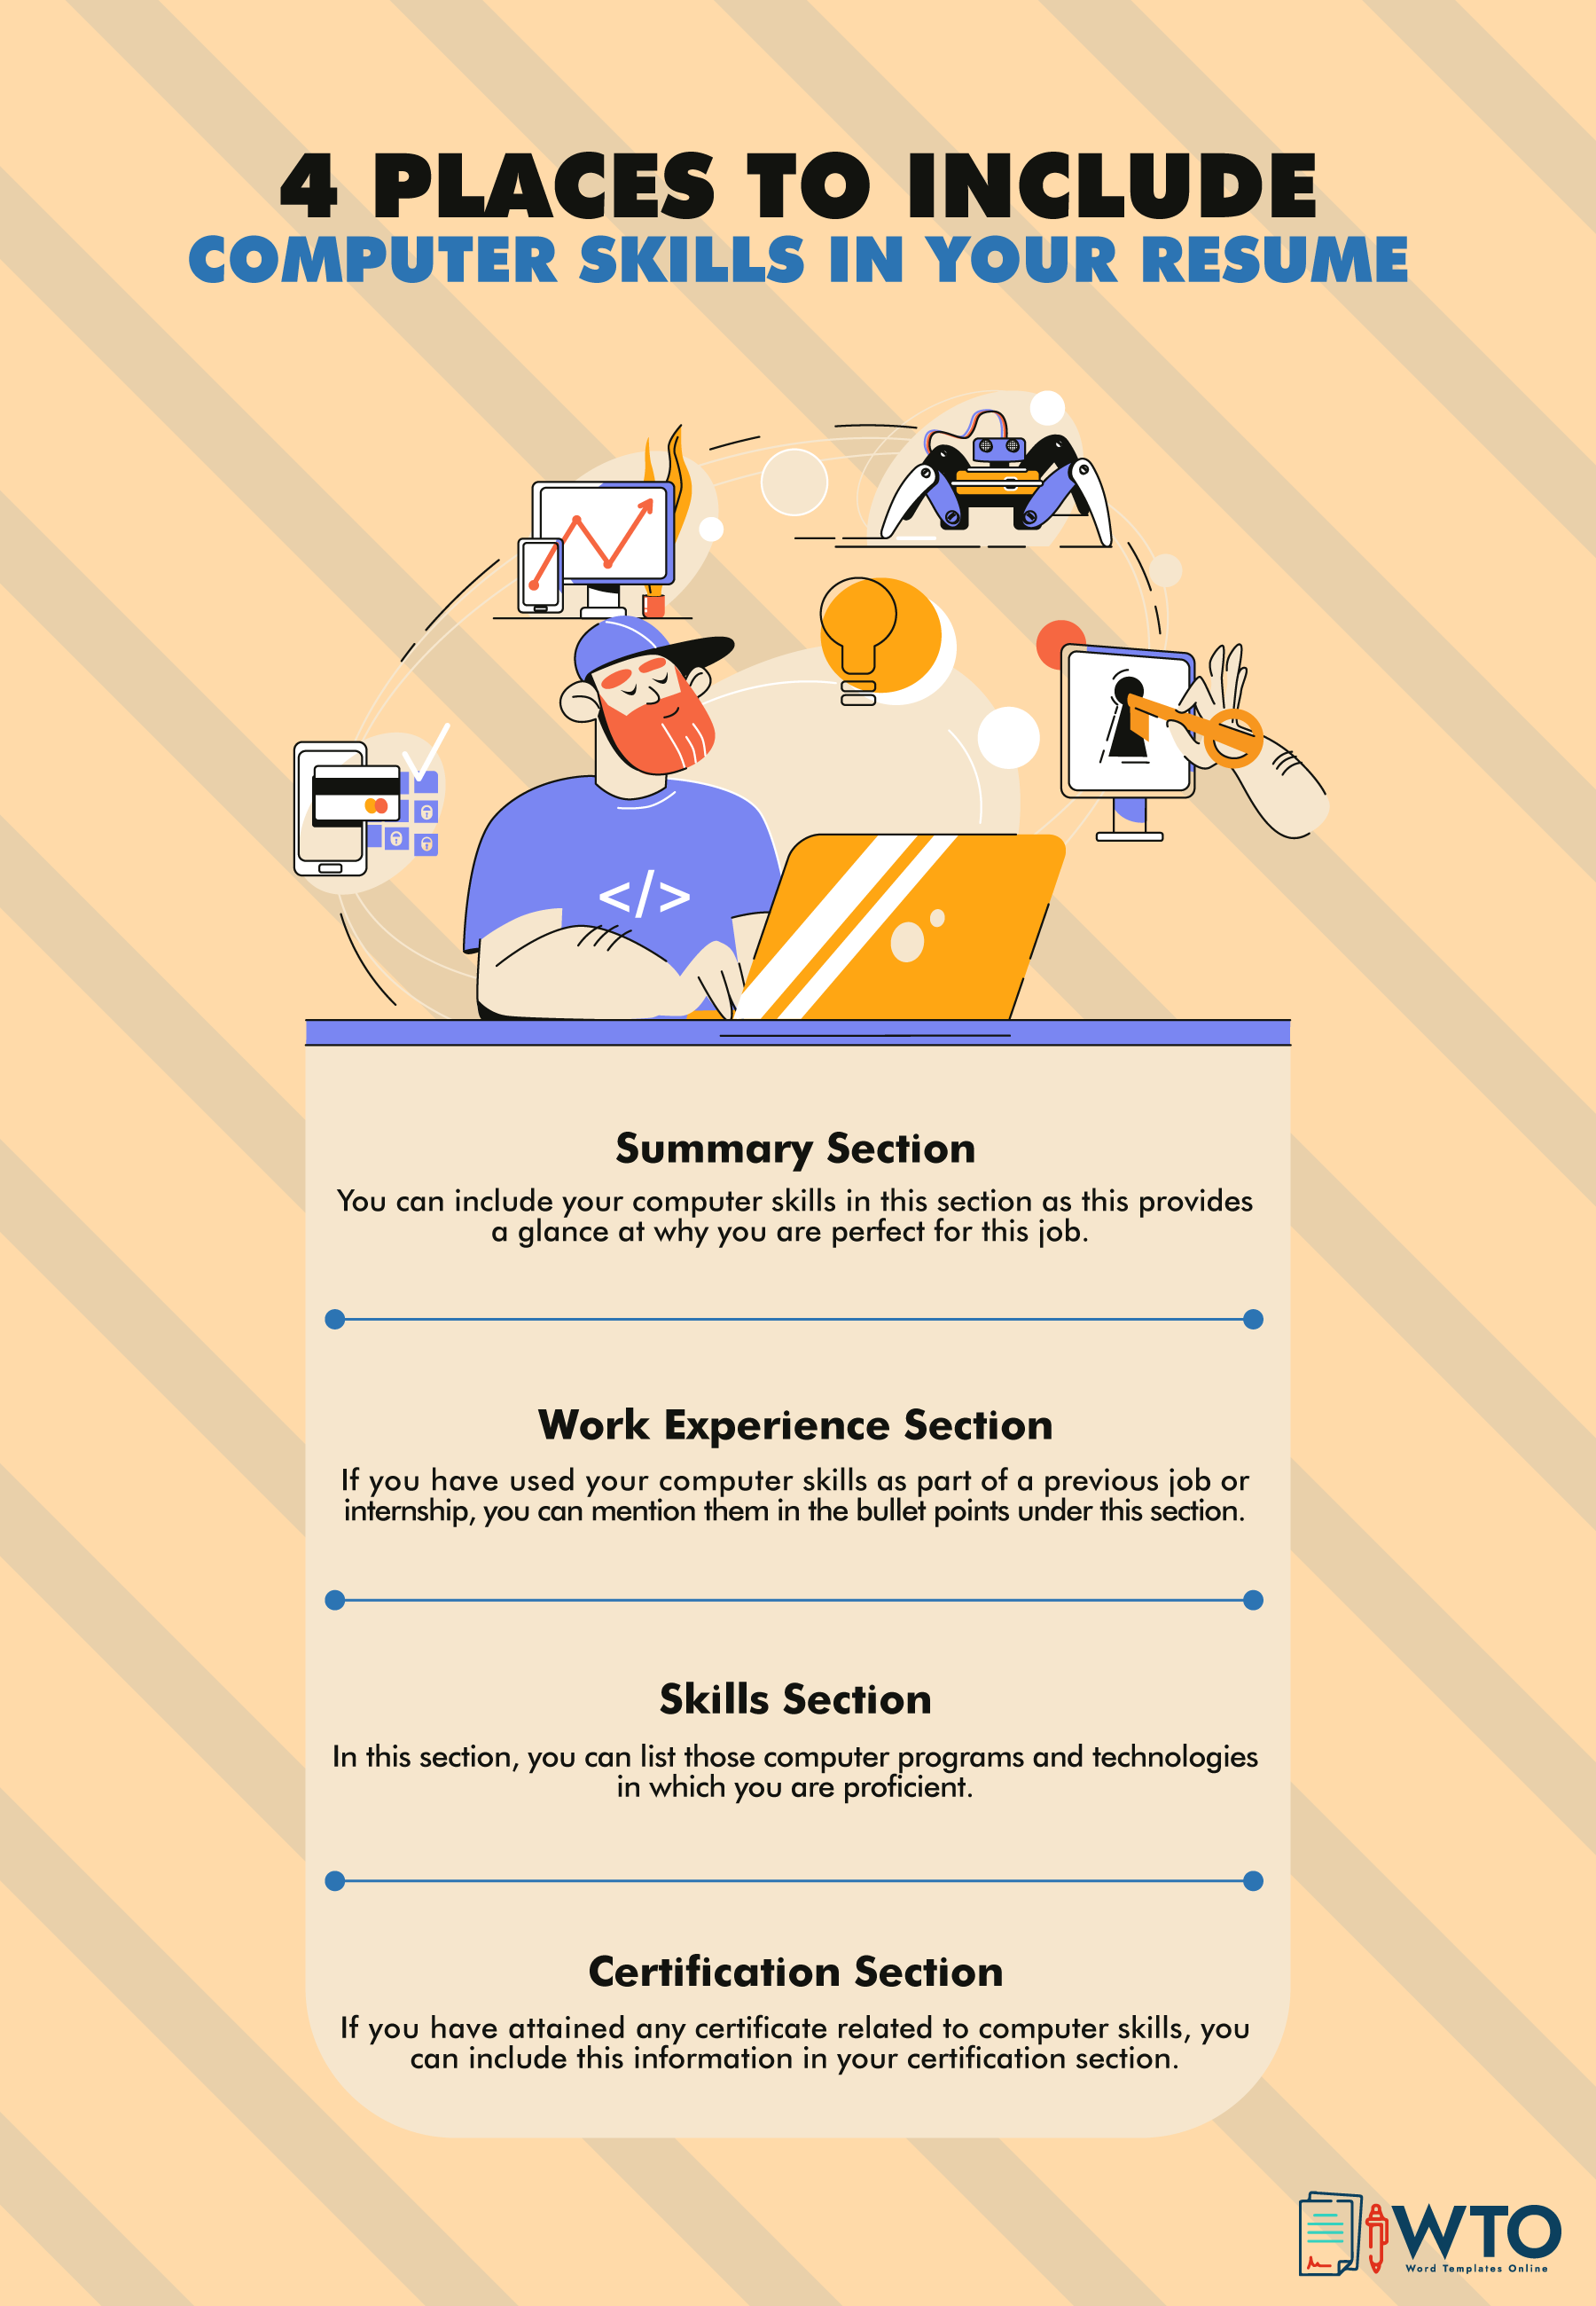 This infographic tells about where to include computer skills in a resume.